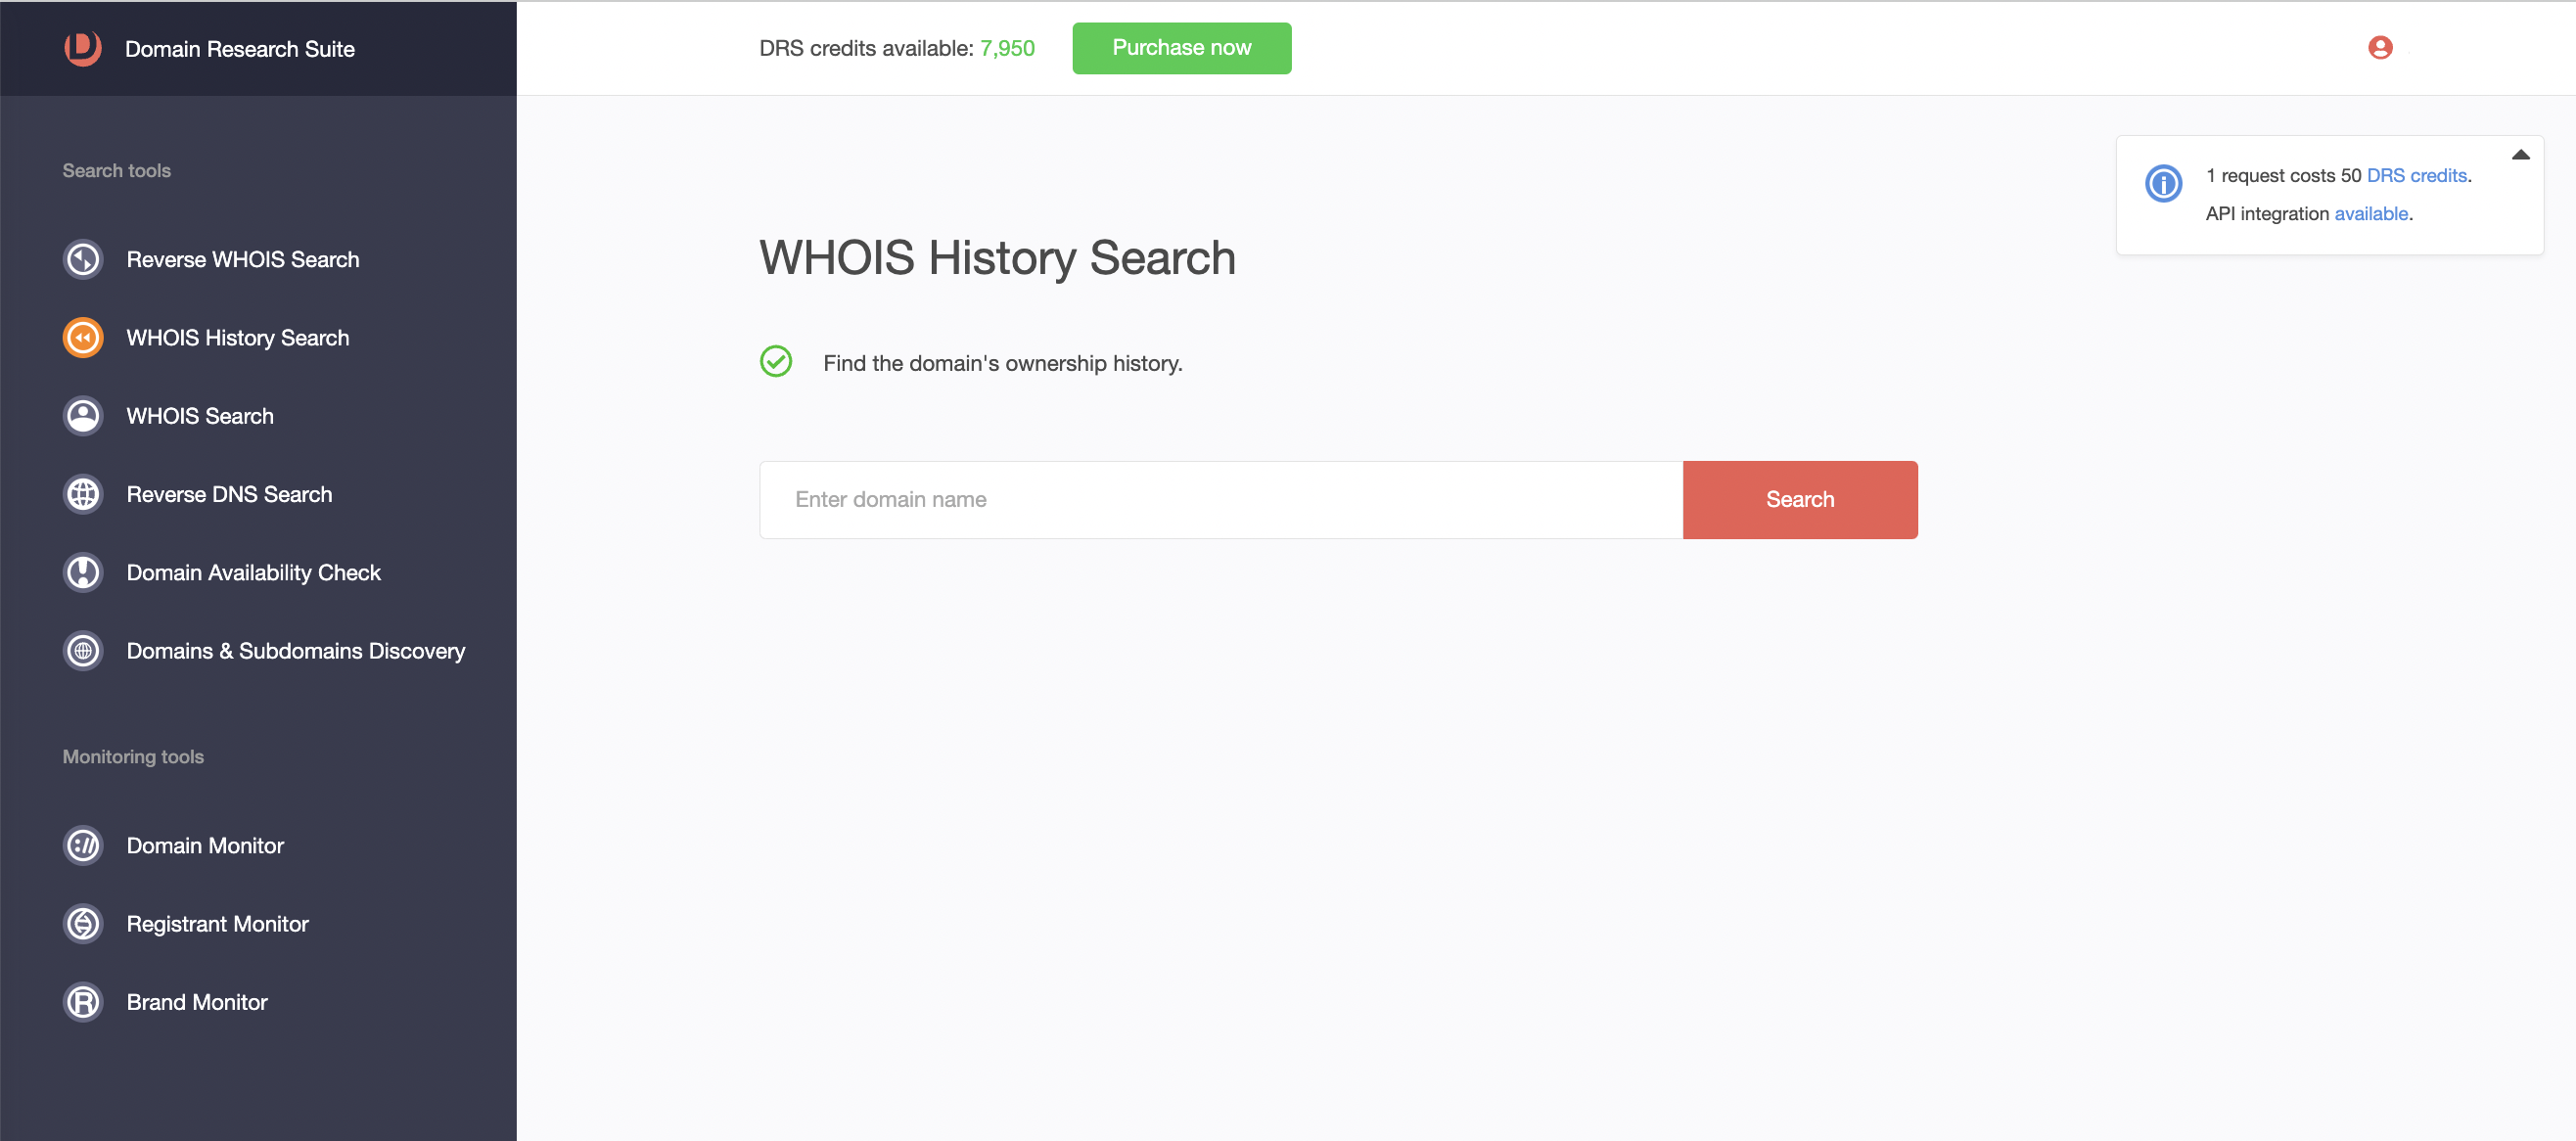 A Complete Guide to WHOIS Lookup